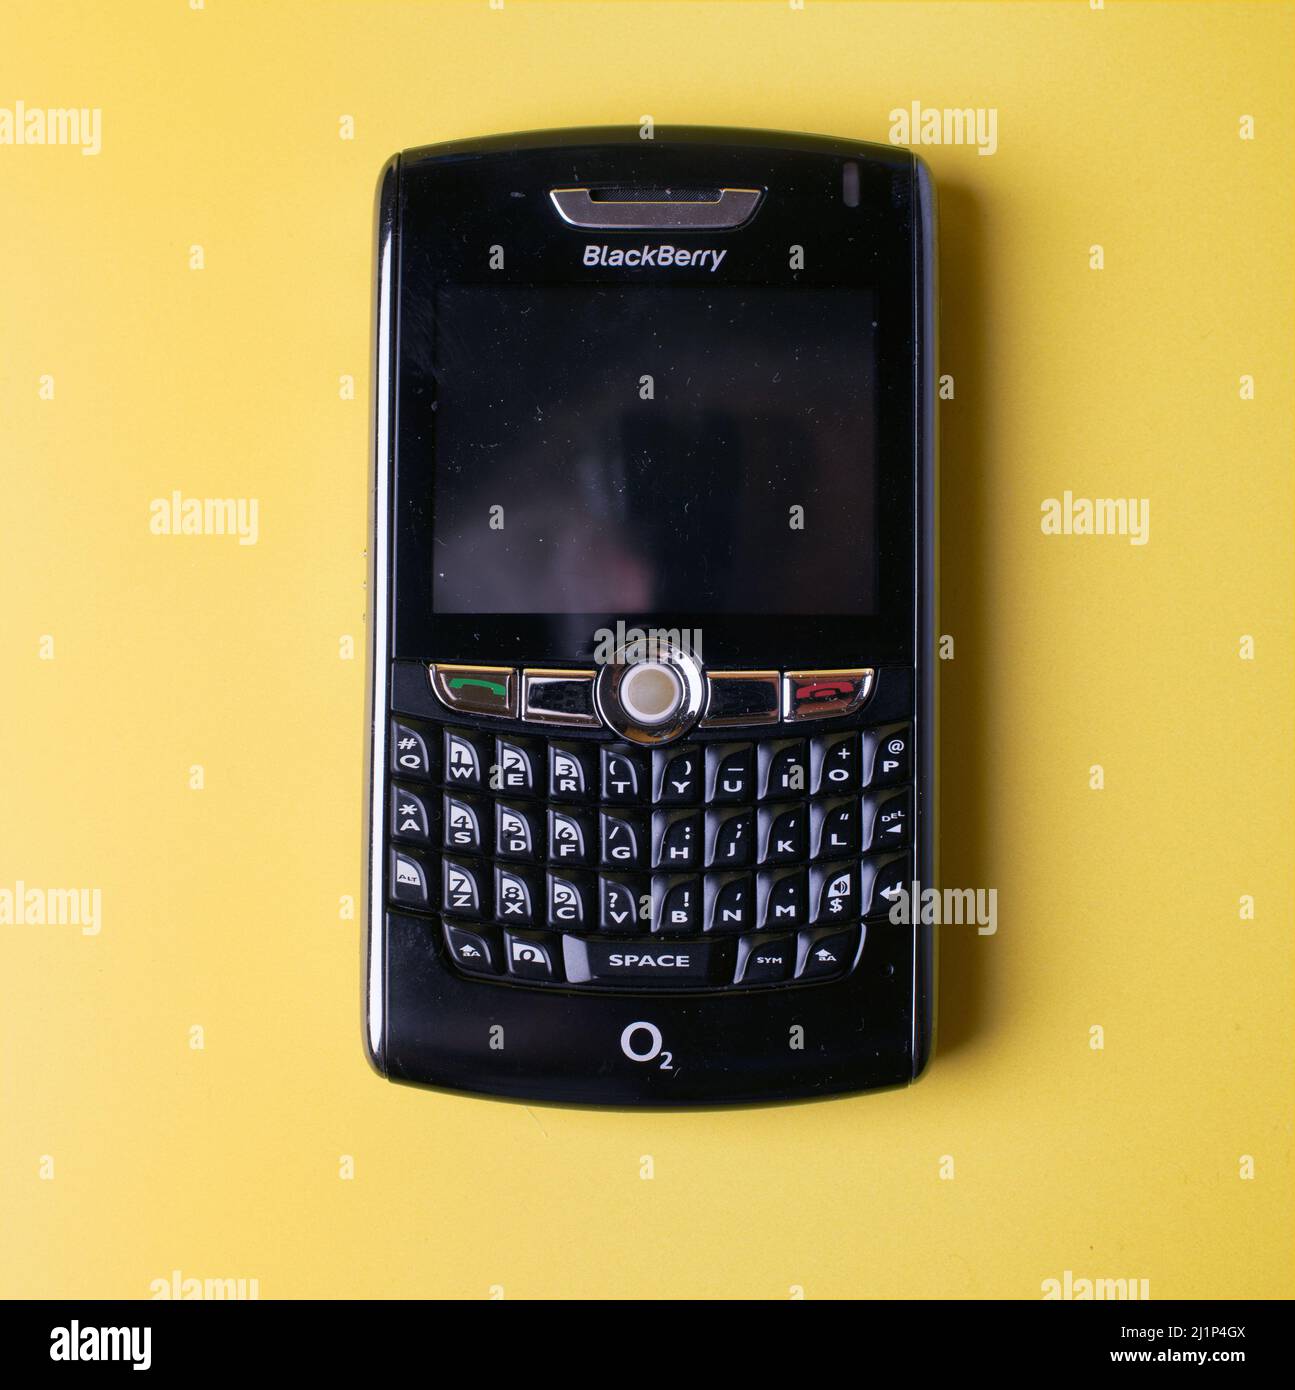 O2 network Blackberry 8800 cell phone personal organiser against a yellow background. Stock Photo